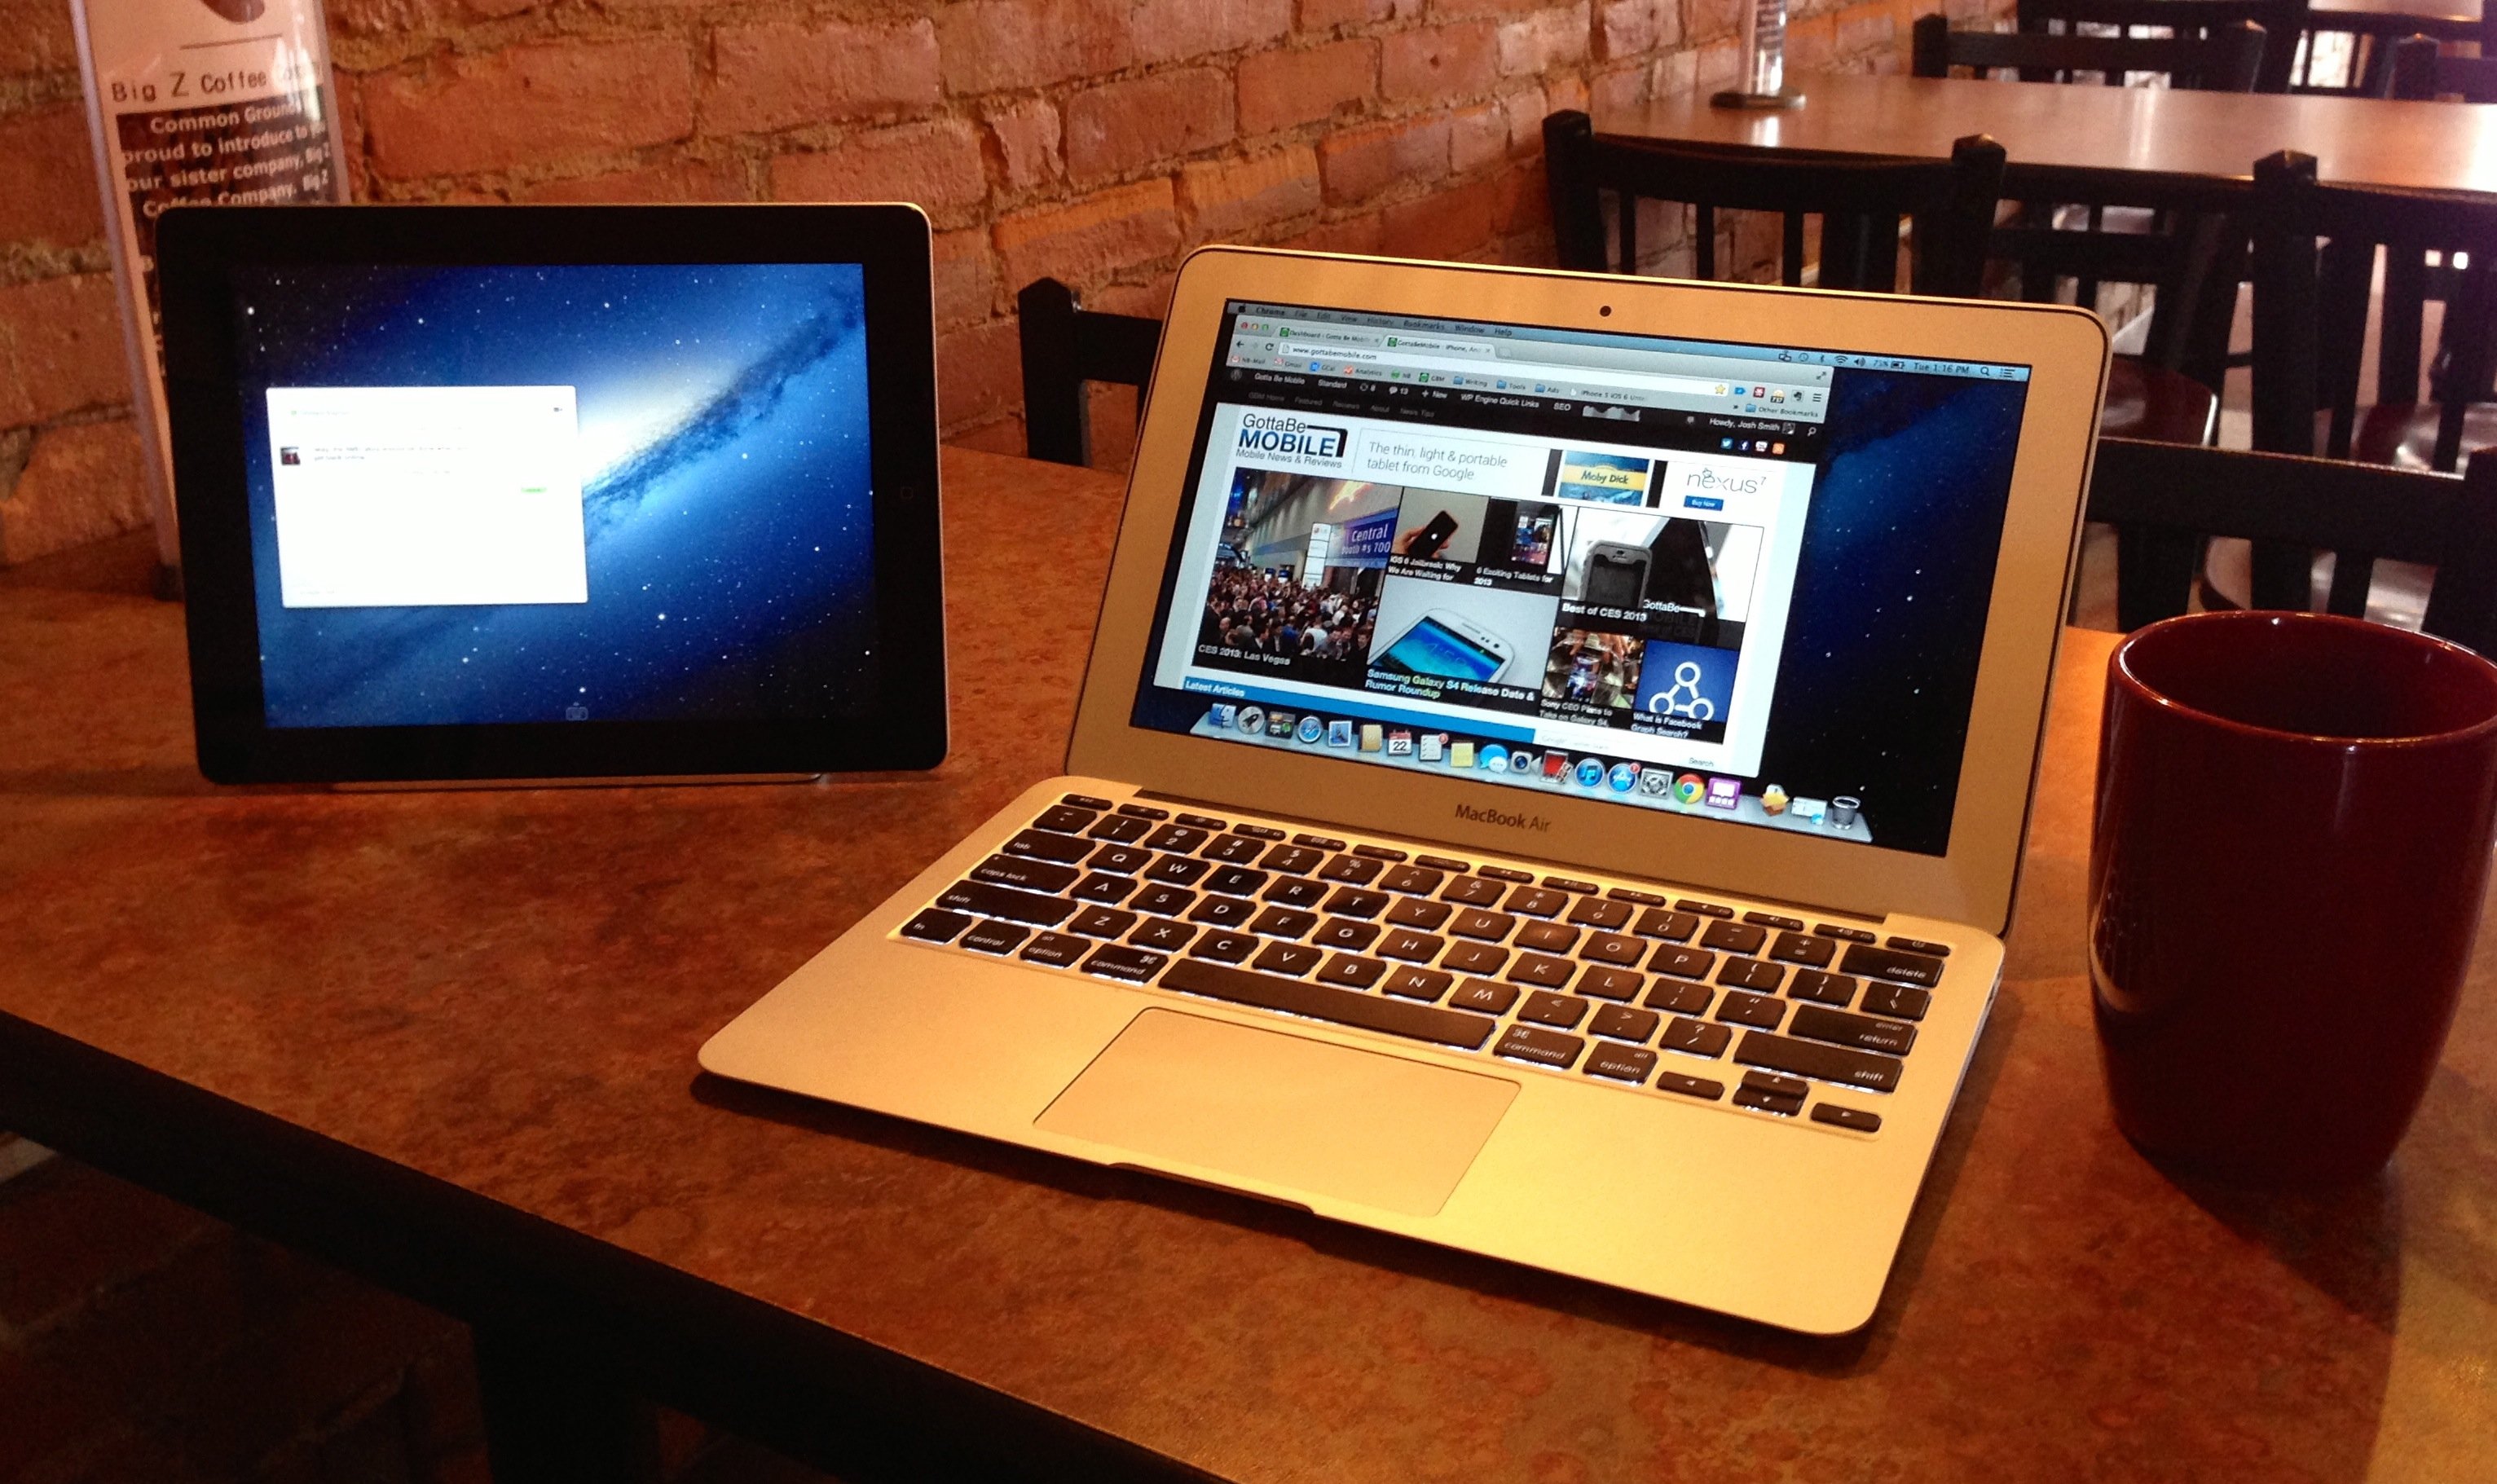 We could see a Retina display on nearly every Apple product in 2014, including a new MacBook Air.